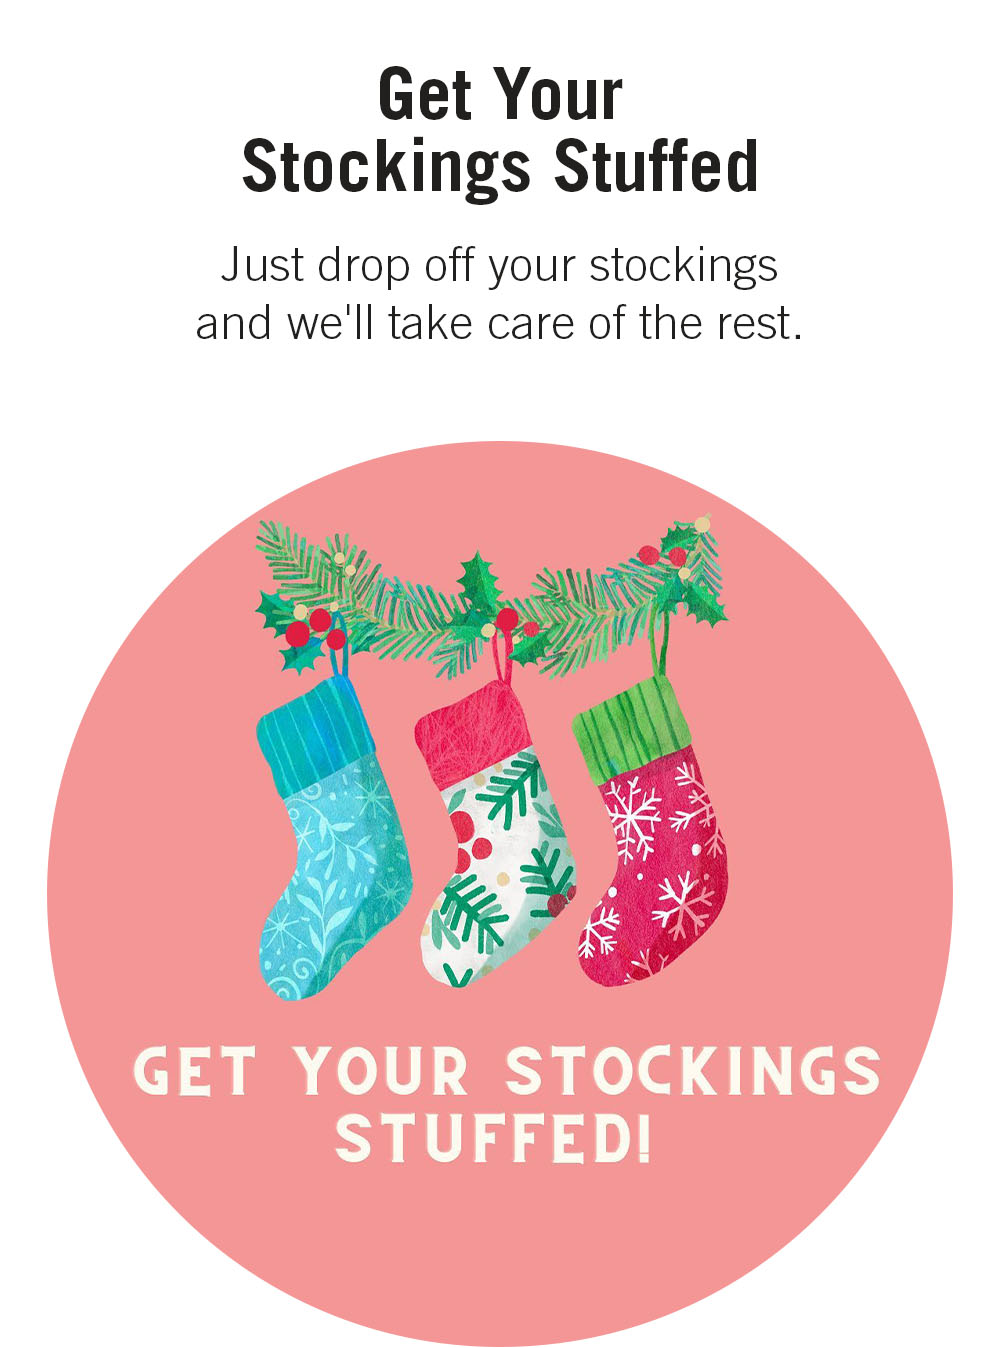 Get Your Stockings Stuffed Just drop off your stockings and we'll take care of the rest